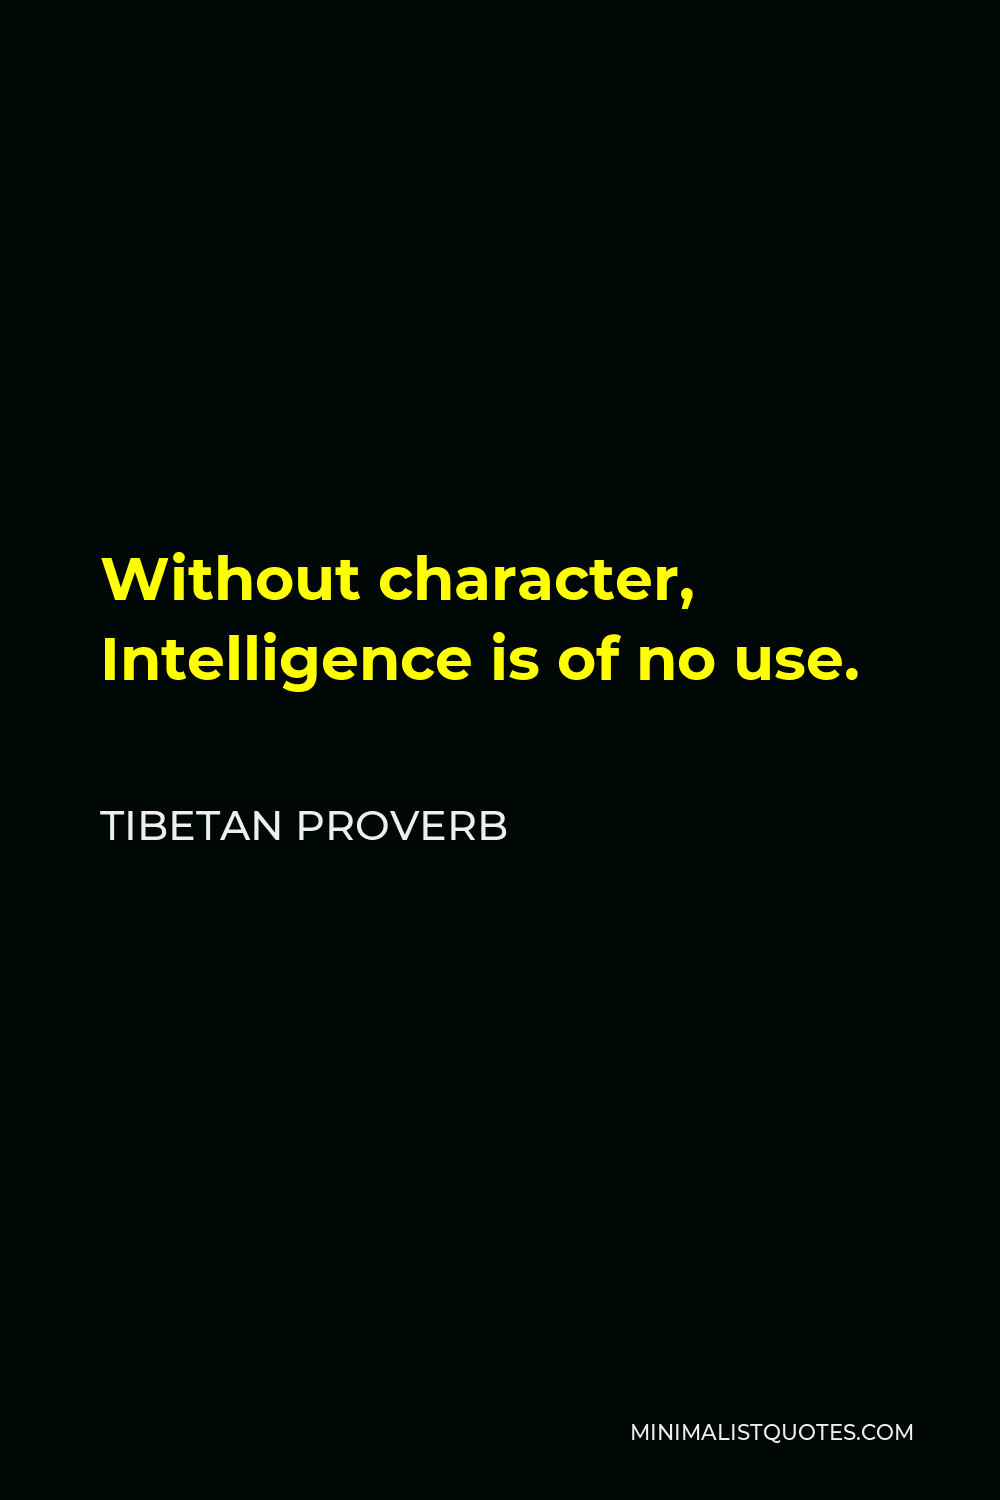 Tibetan Proverb Quote - Without character, Intelligence is of no use.